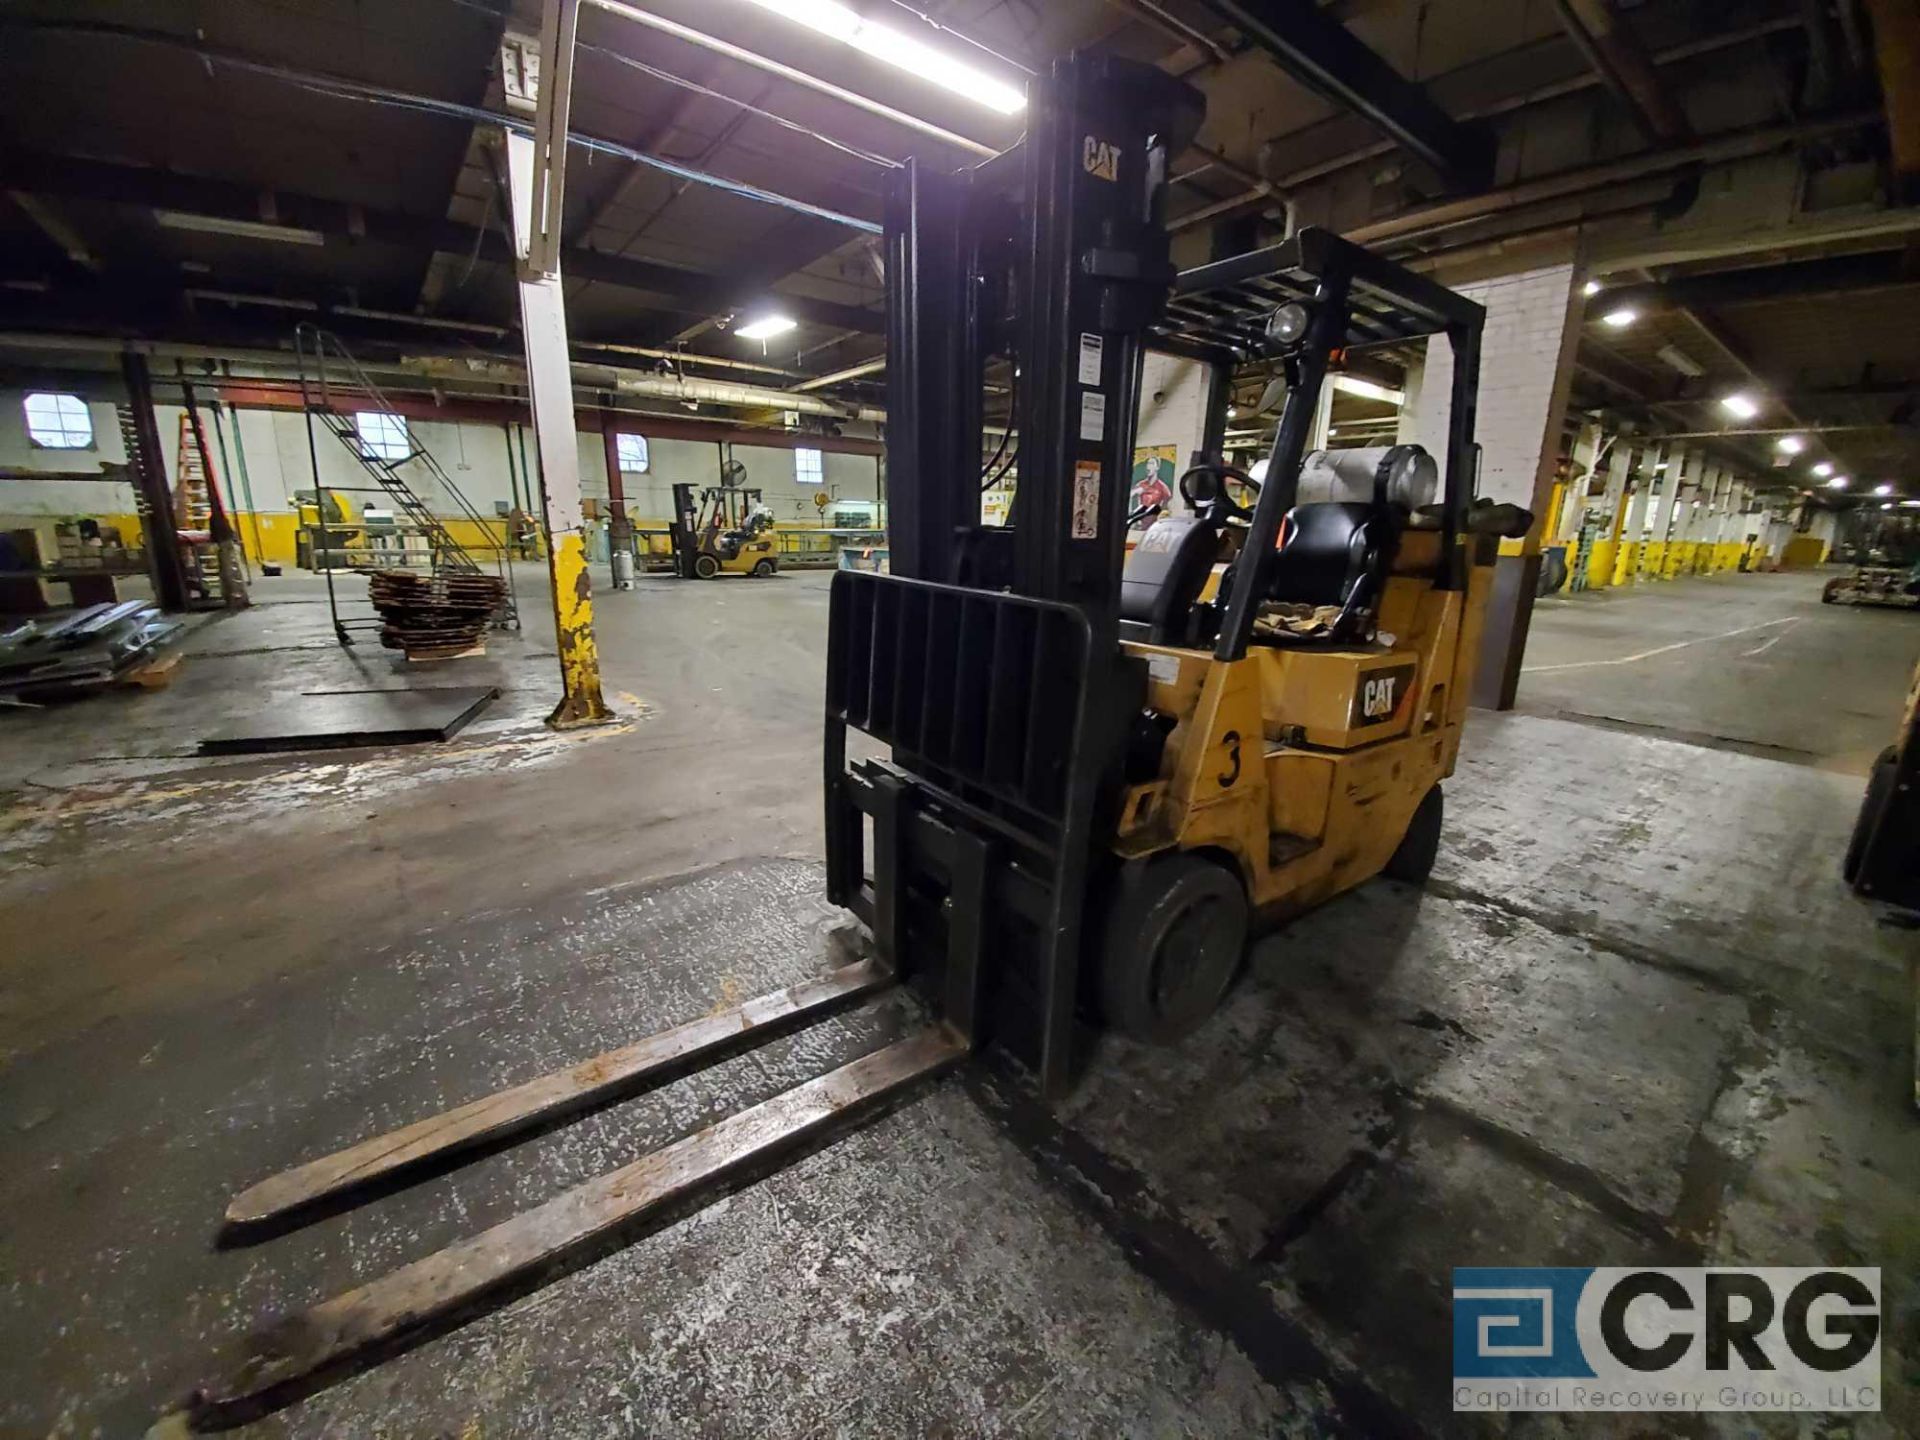 Caterpillar m/n GC40KS2 solid tire LP forklift, 7400 lb. capacity, 201 in. mast with side shift - Bild 3 aus 7